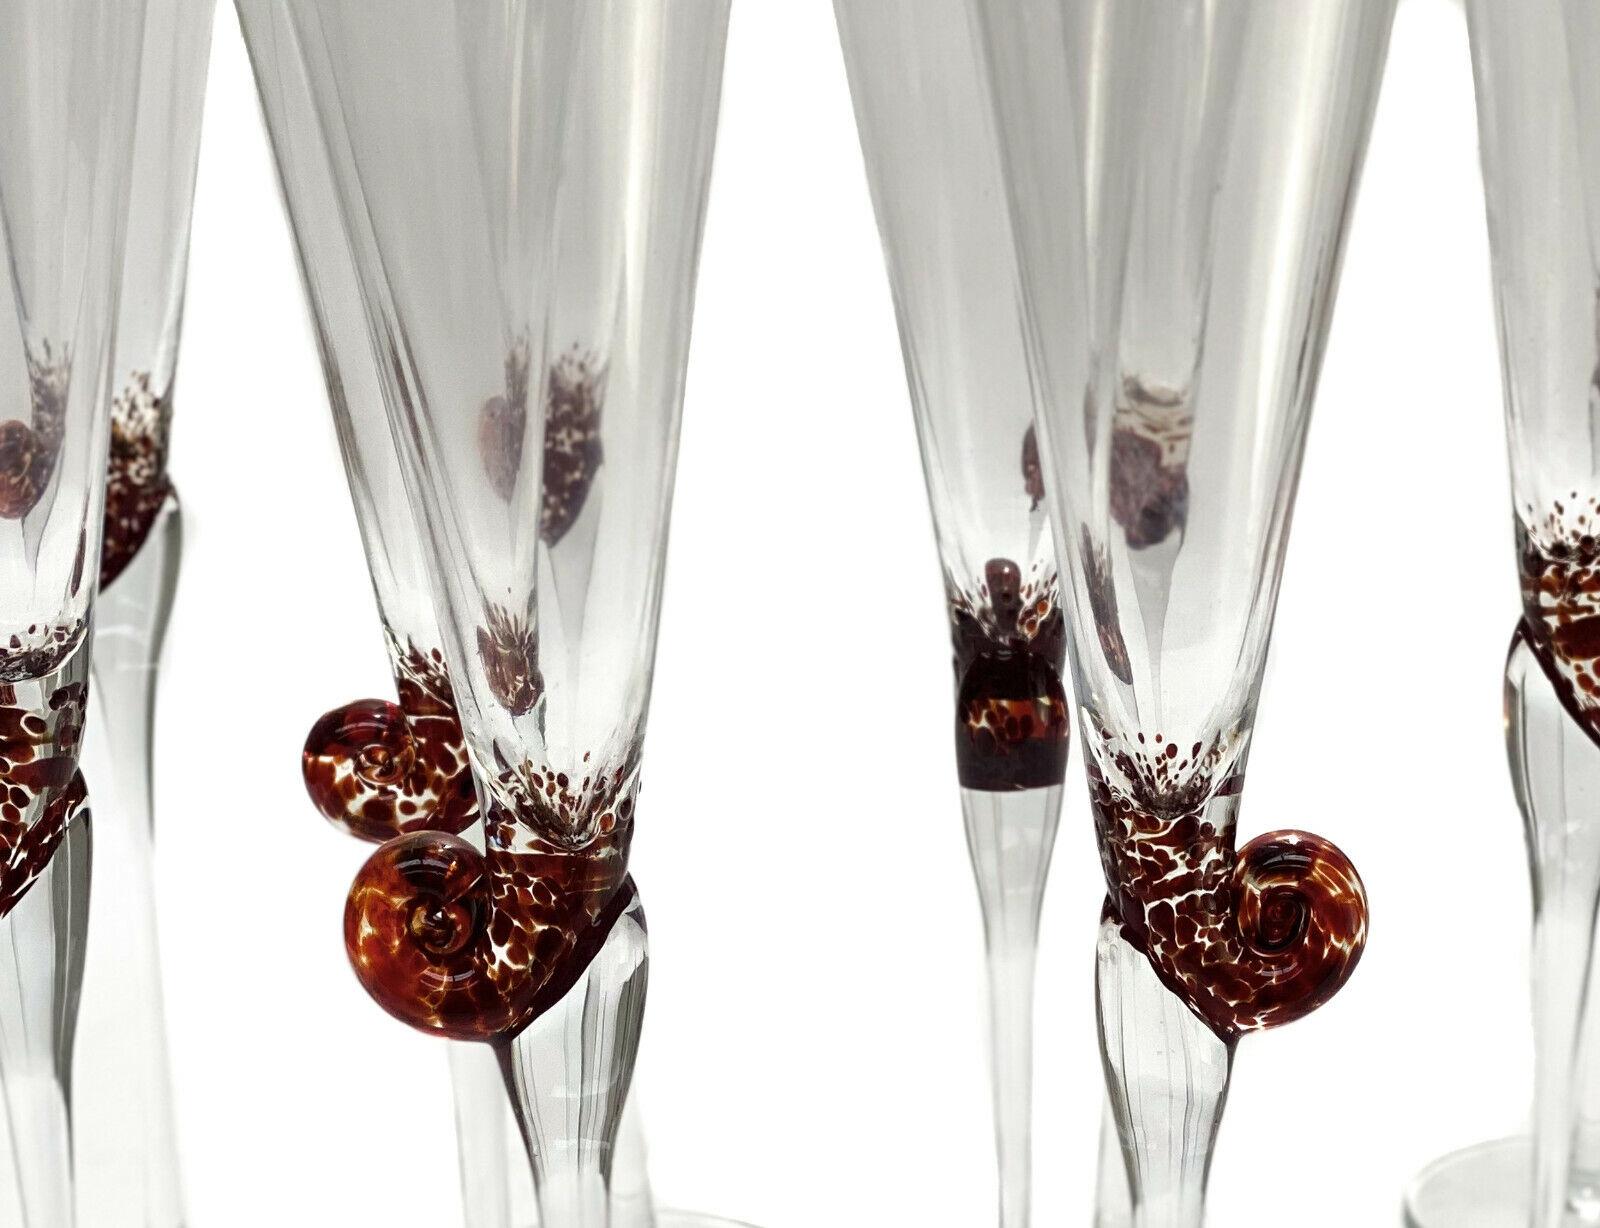 Set of 16 Continental cut glass Snail Escargot Caviar Wine Goblets

Additional Information:
Material: Glass 
Type: Wine Glass
Color: Clear 
Brand: Continental
Production Style: Elegant Glass 
Type of Glass: Cut Glass
Dimension: 2.5 inches